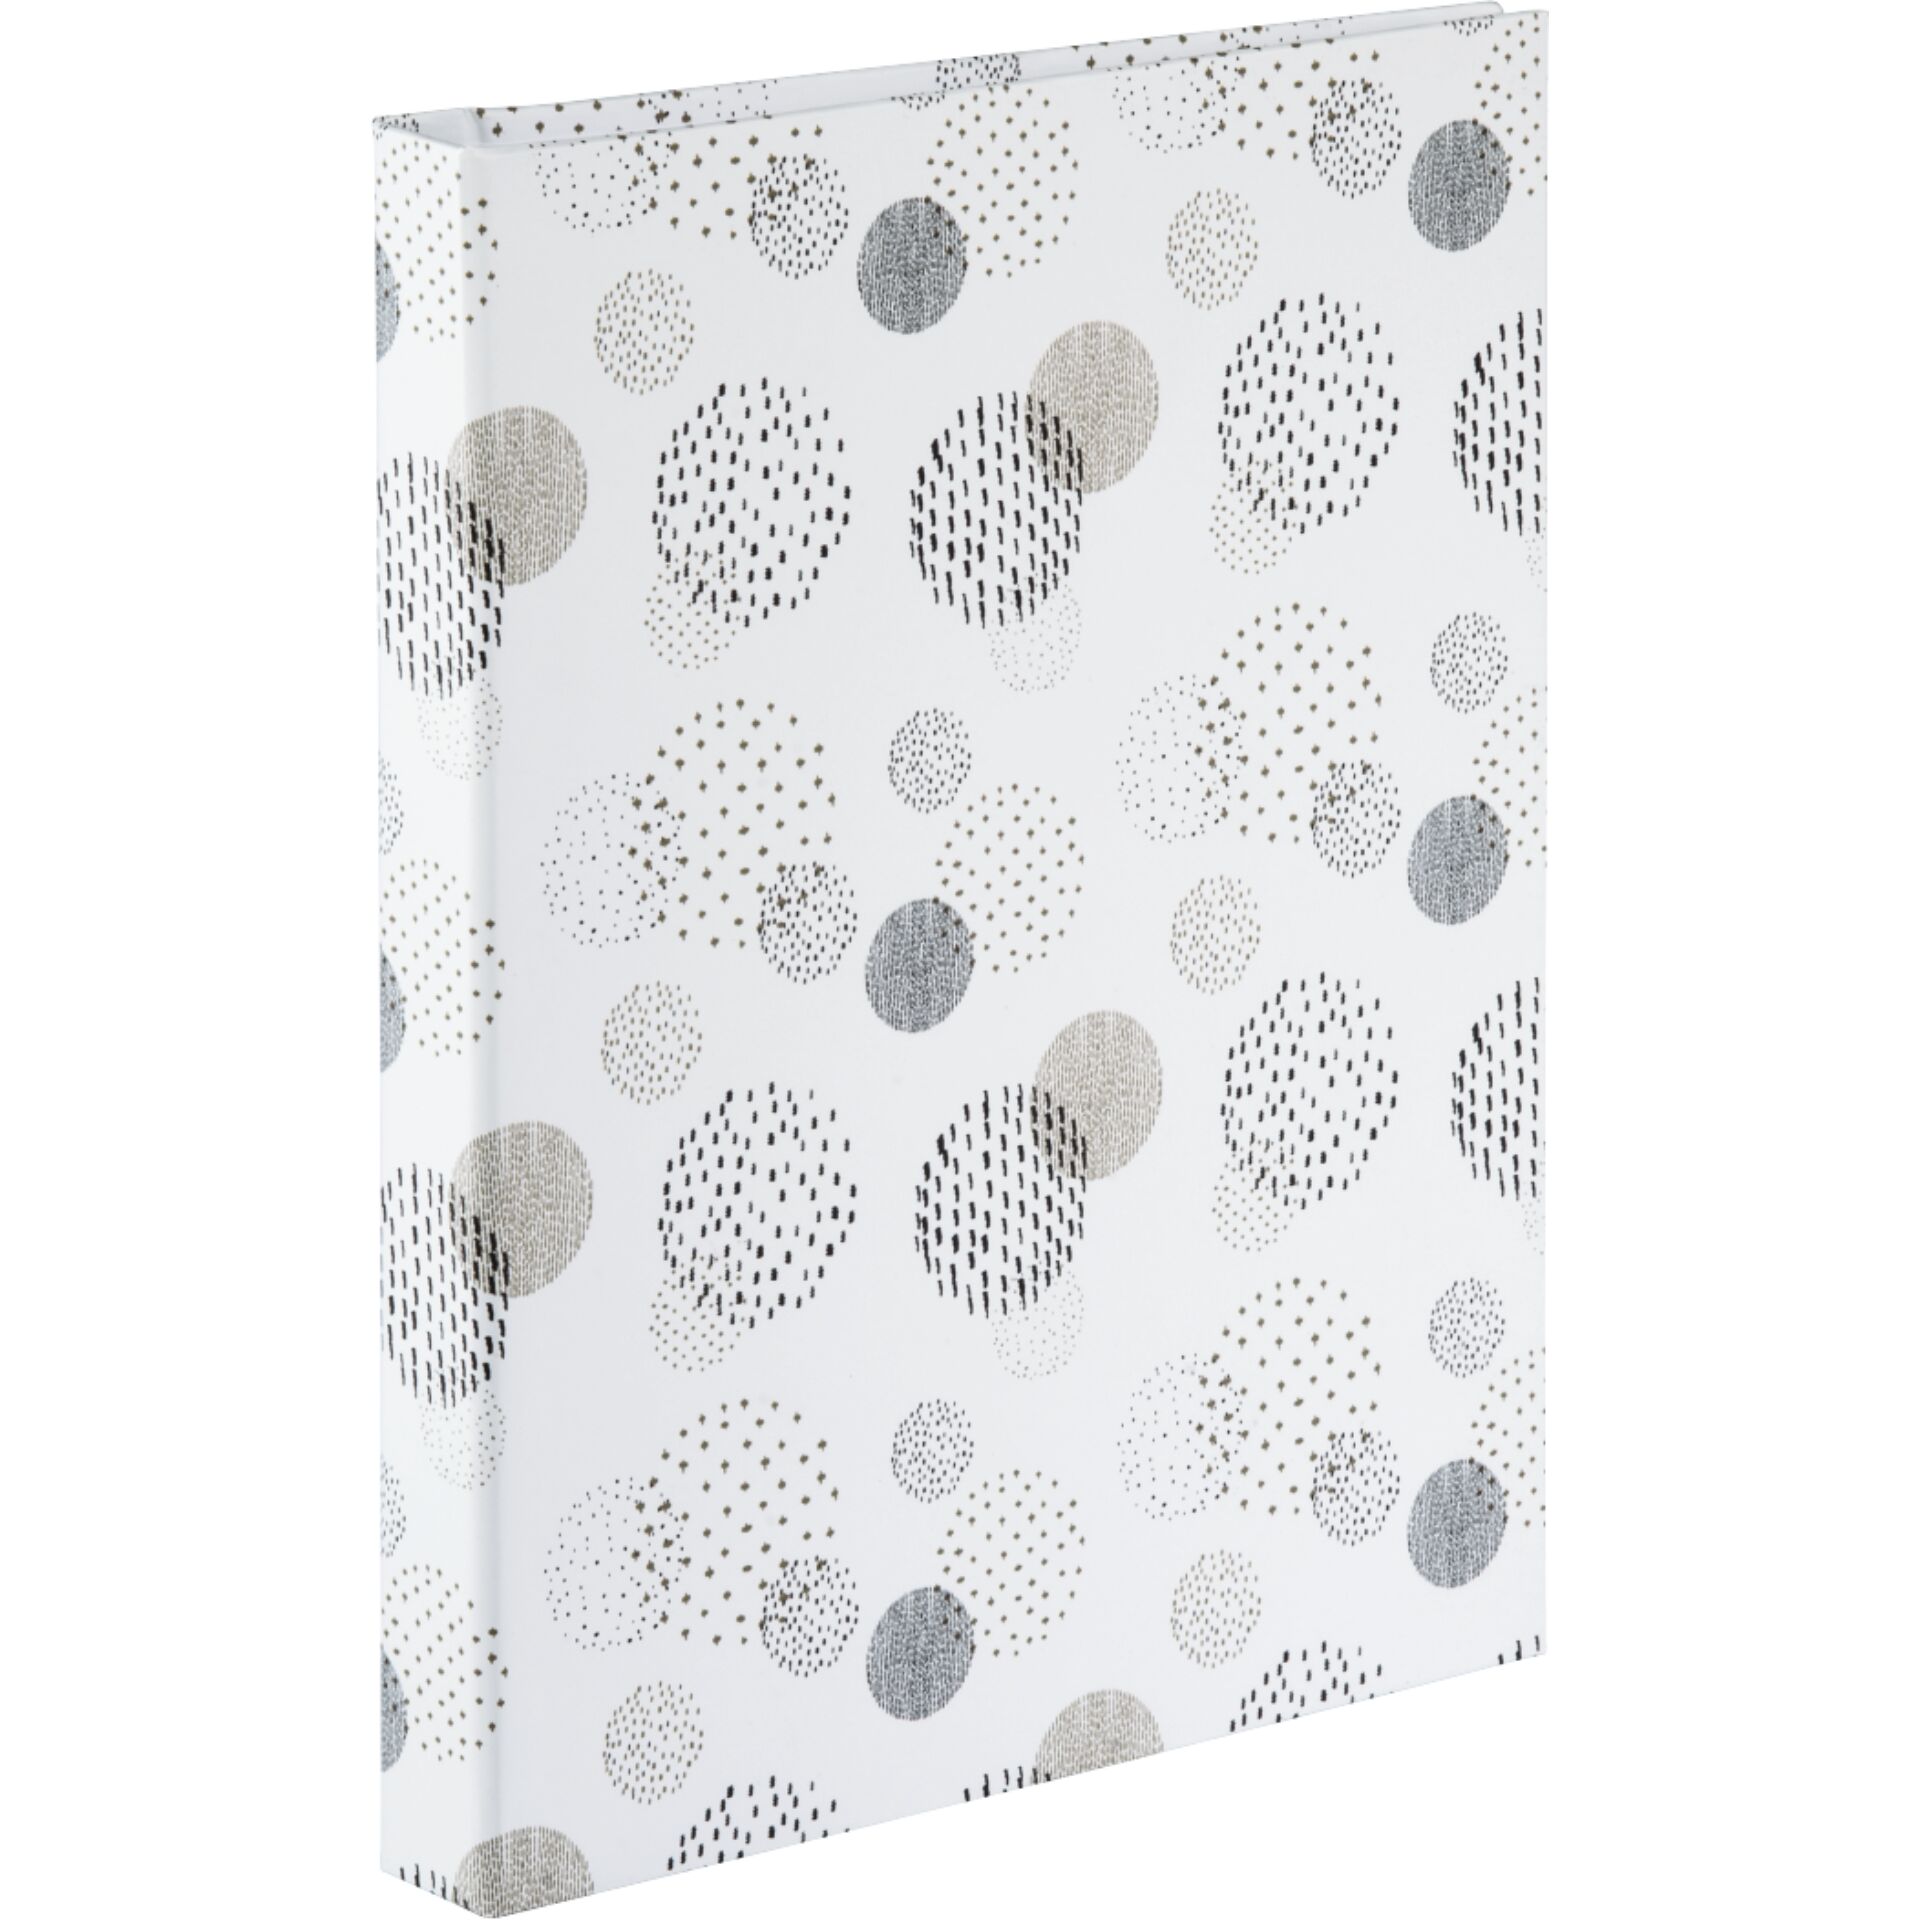 Hama Graphic Spiral dots 19x24.5 - 40 white Pages